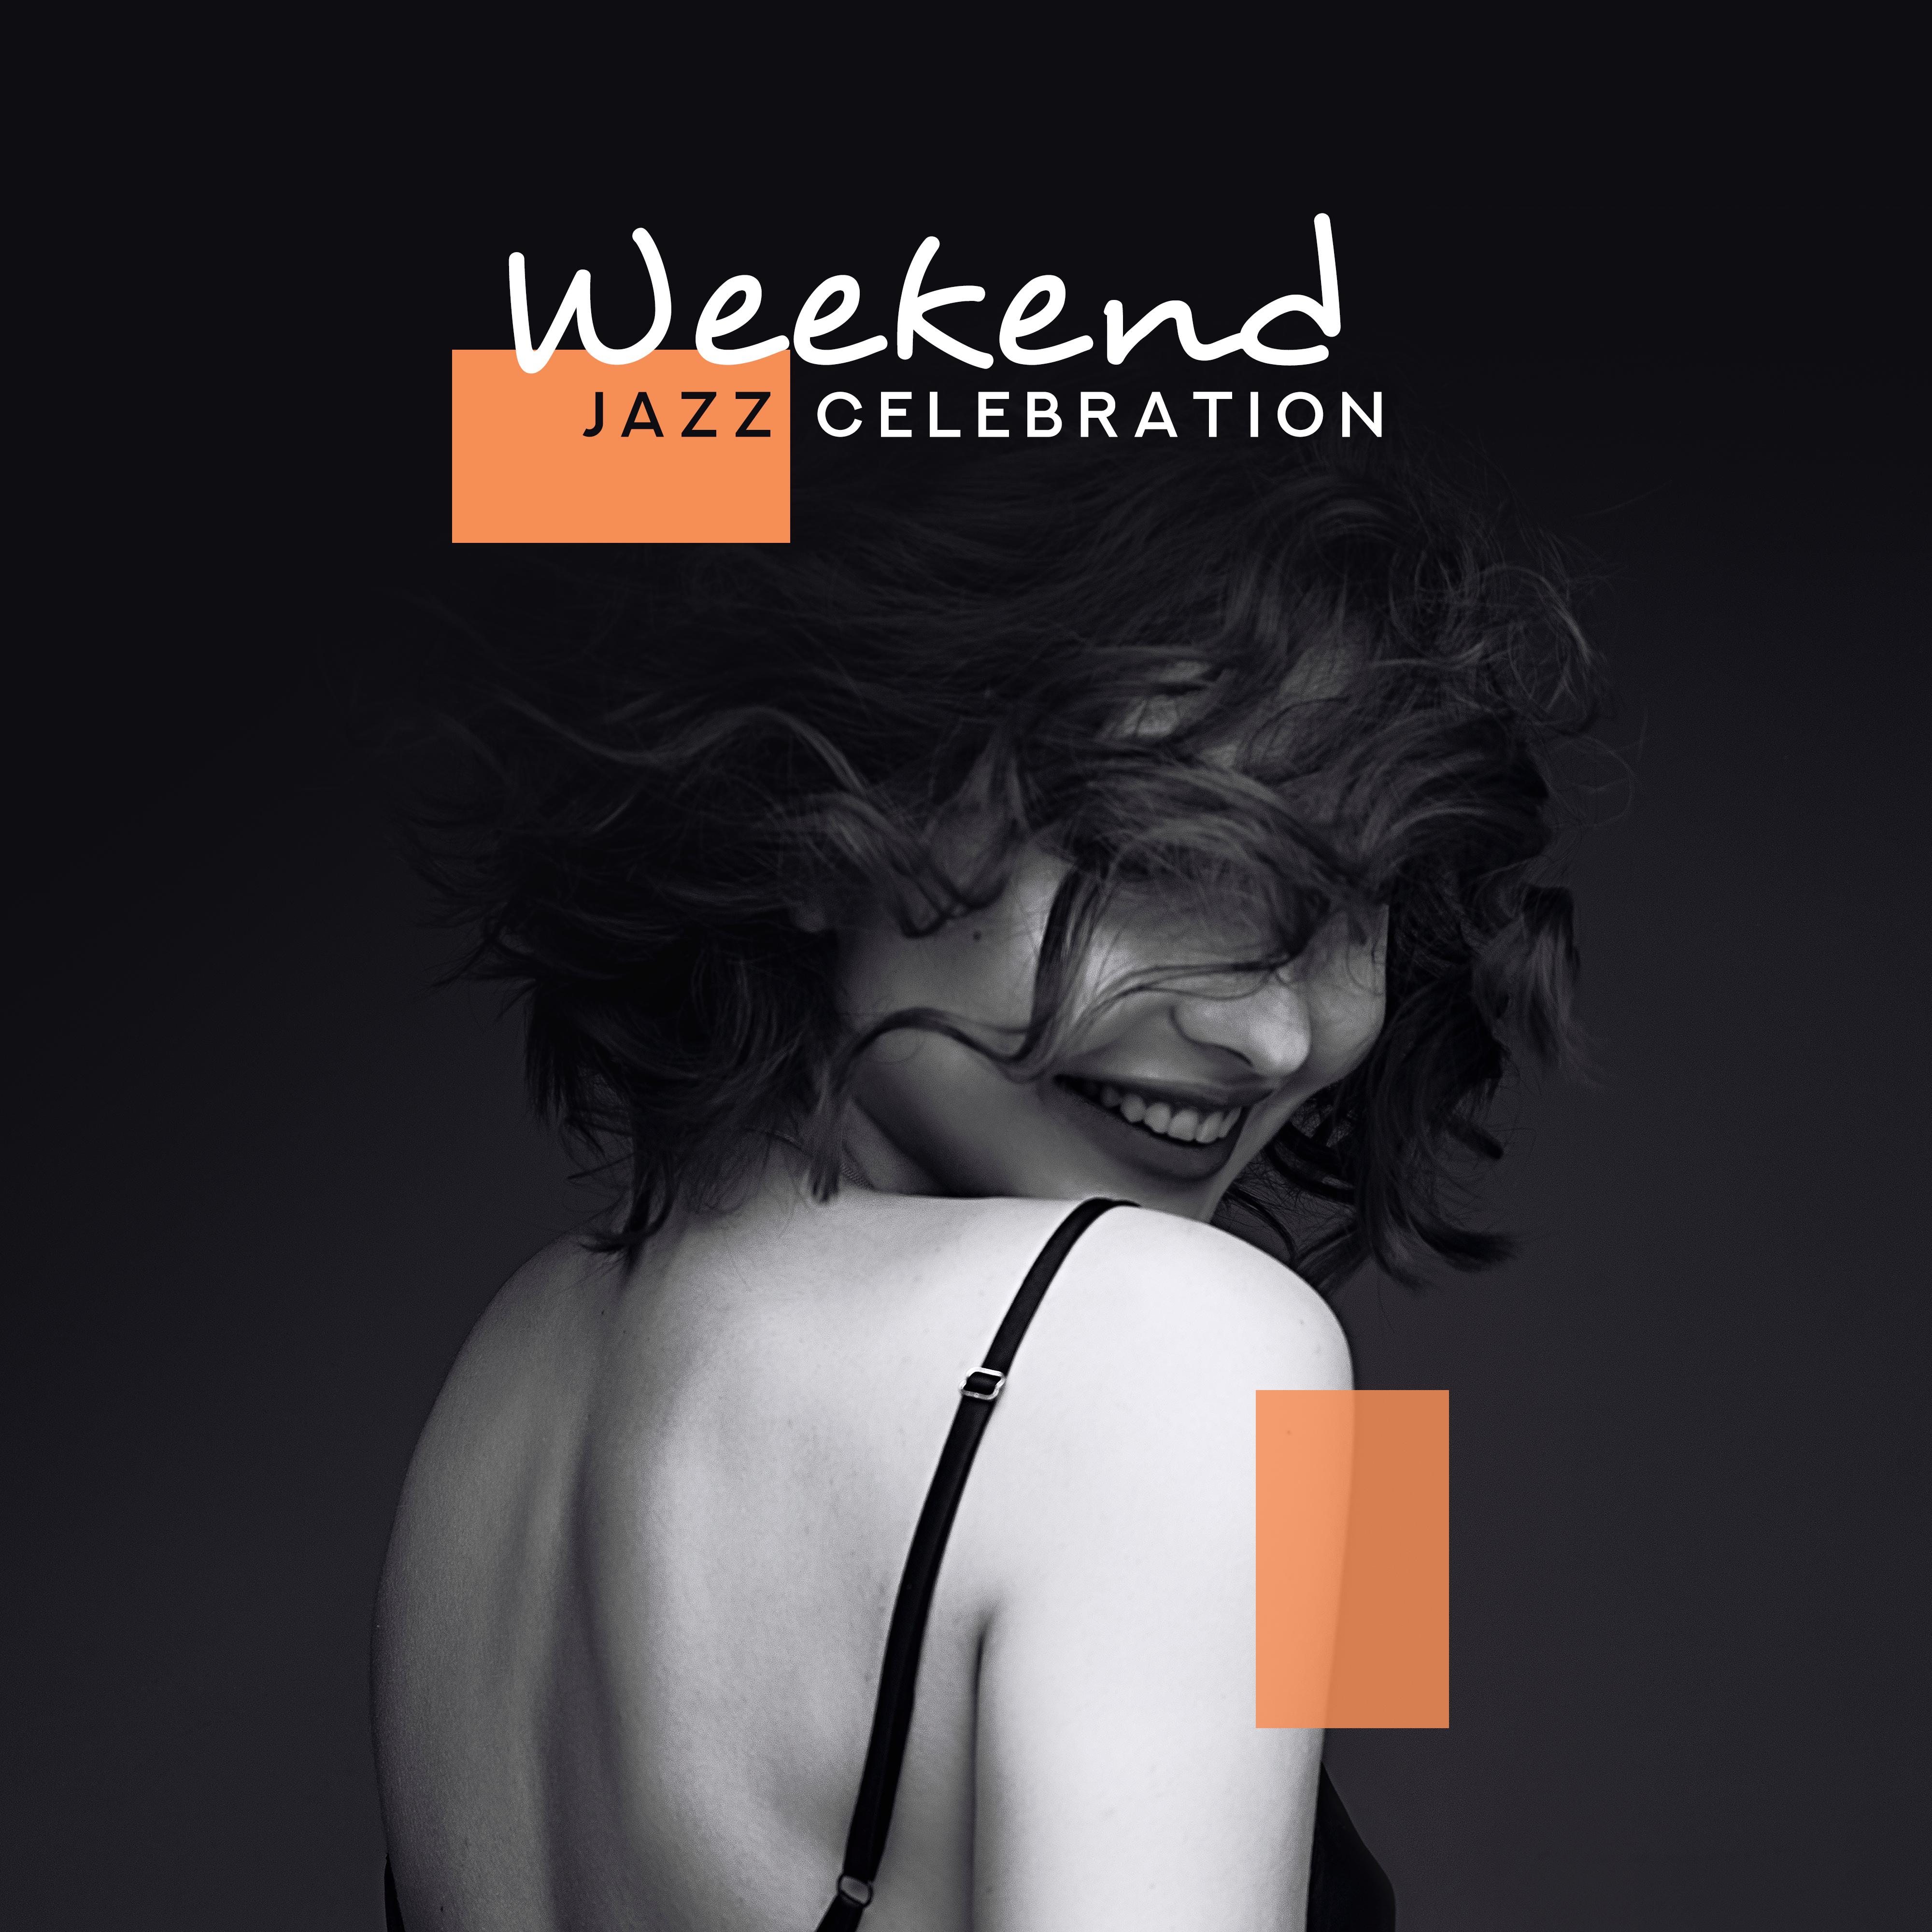 Weekend Jazz Celebration: 2019 Instrumental Happy Smooth Jazz for Total Weekend Relaxation, Meeting with Friends, Lounge Bar Background Music